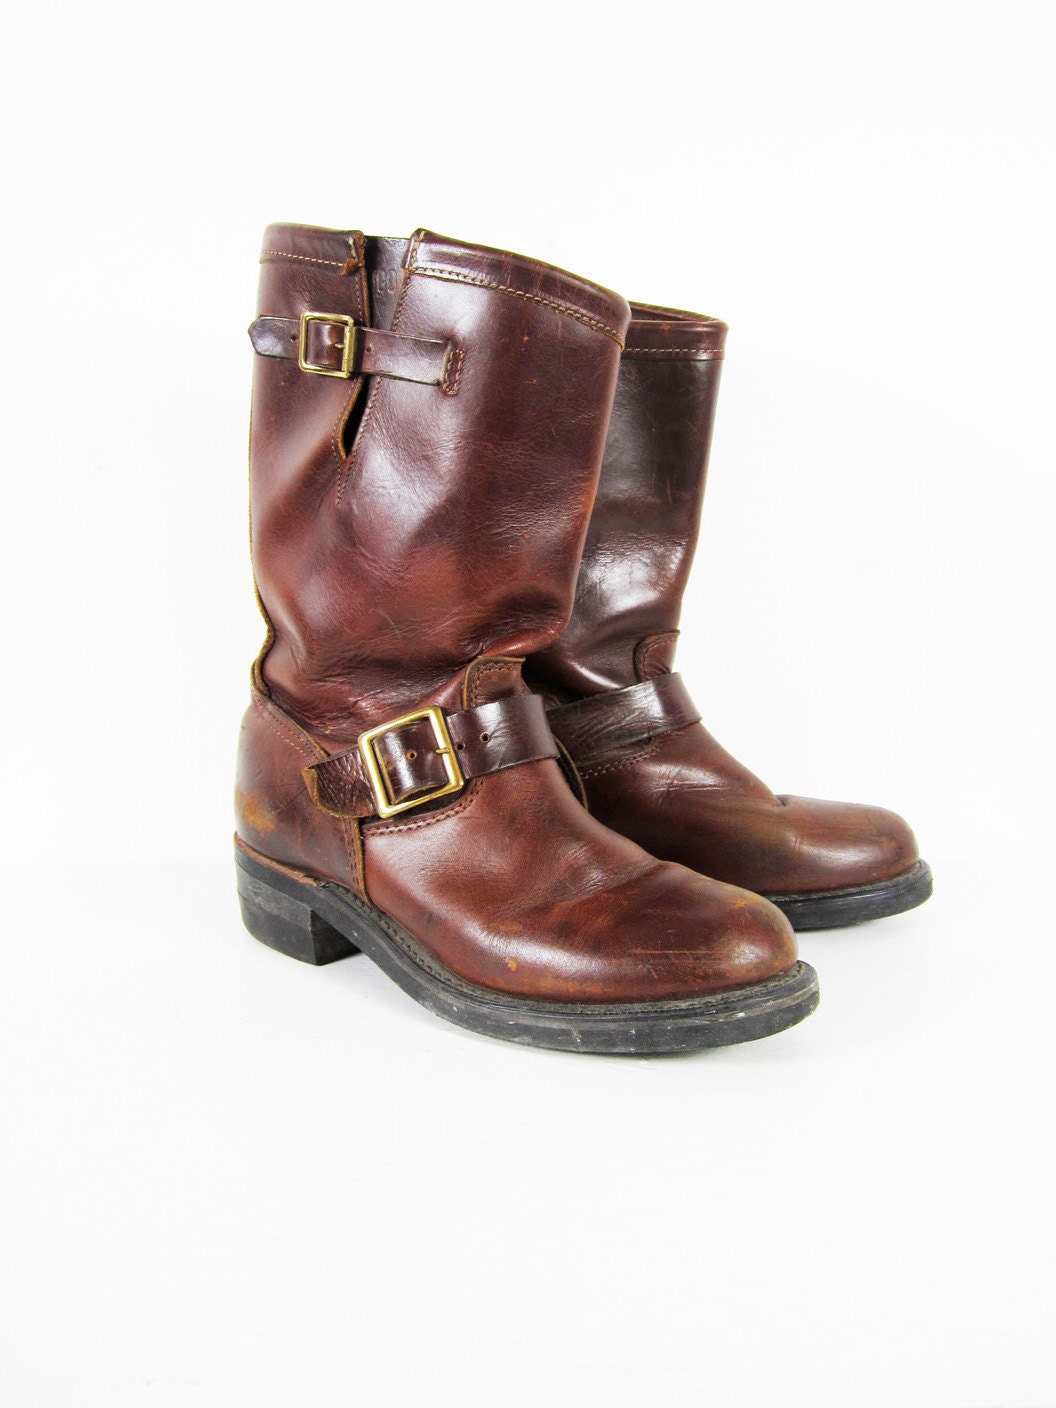 Vintage 60s Brown Engineer Boots Durango Leather Buckle Strap